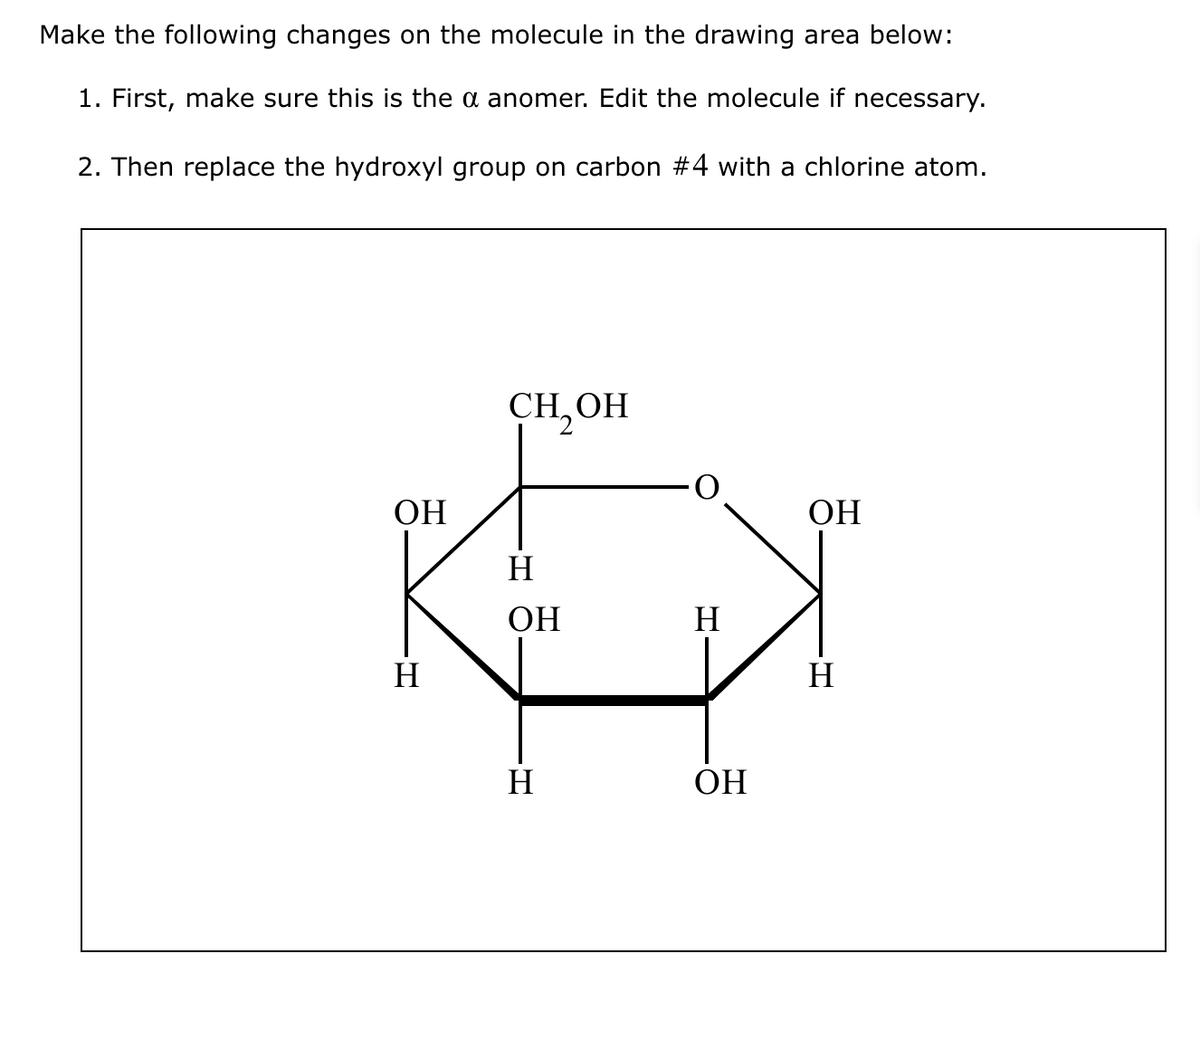 Make the following changes on the molecule in the drawing area below:
1. First, make sure this is the a anomer. Edit the molecule if necessary.
2. Then replace the hydroxyl group on carbon #4 with a chlorine atom.
ОН
H
CH OH
H
ОН
H
H
ОН
ОН
Н